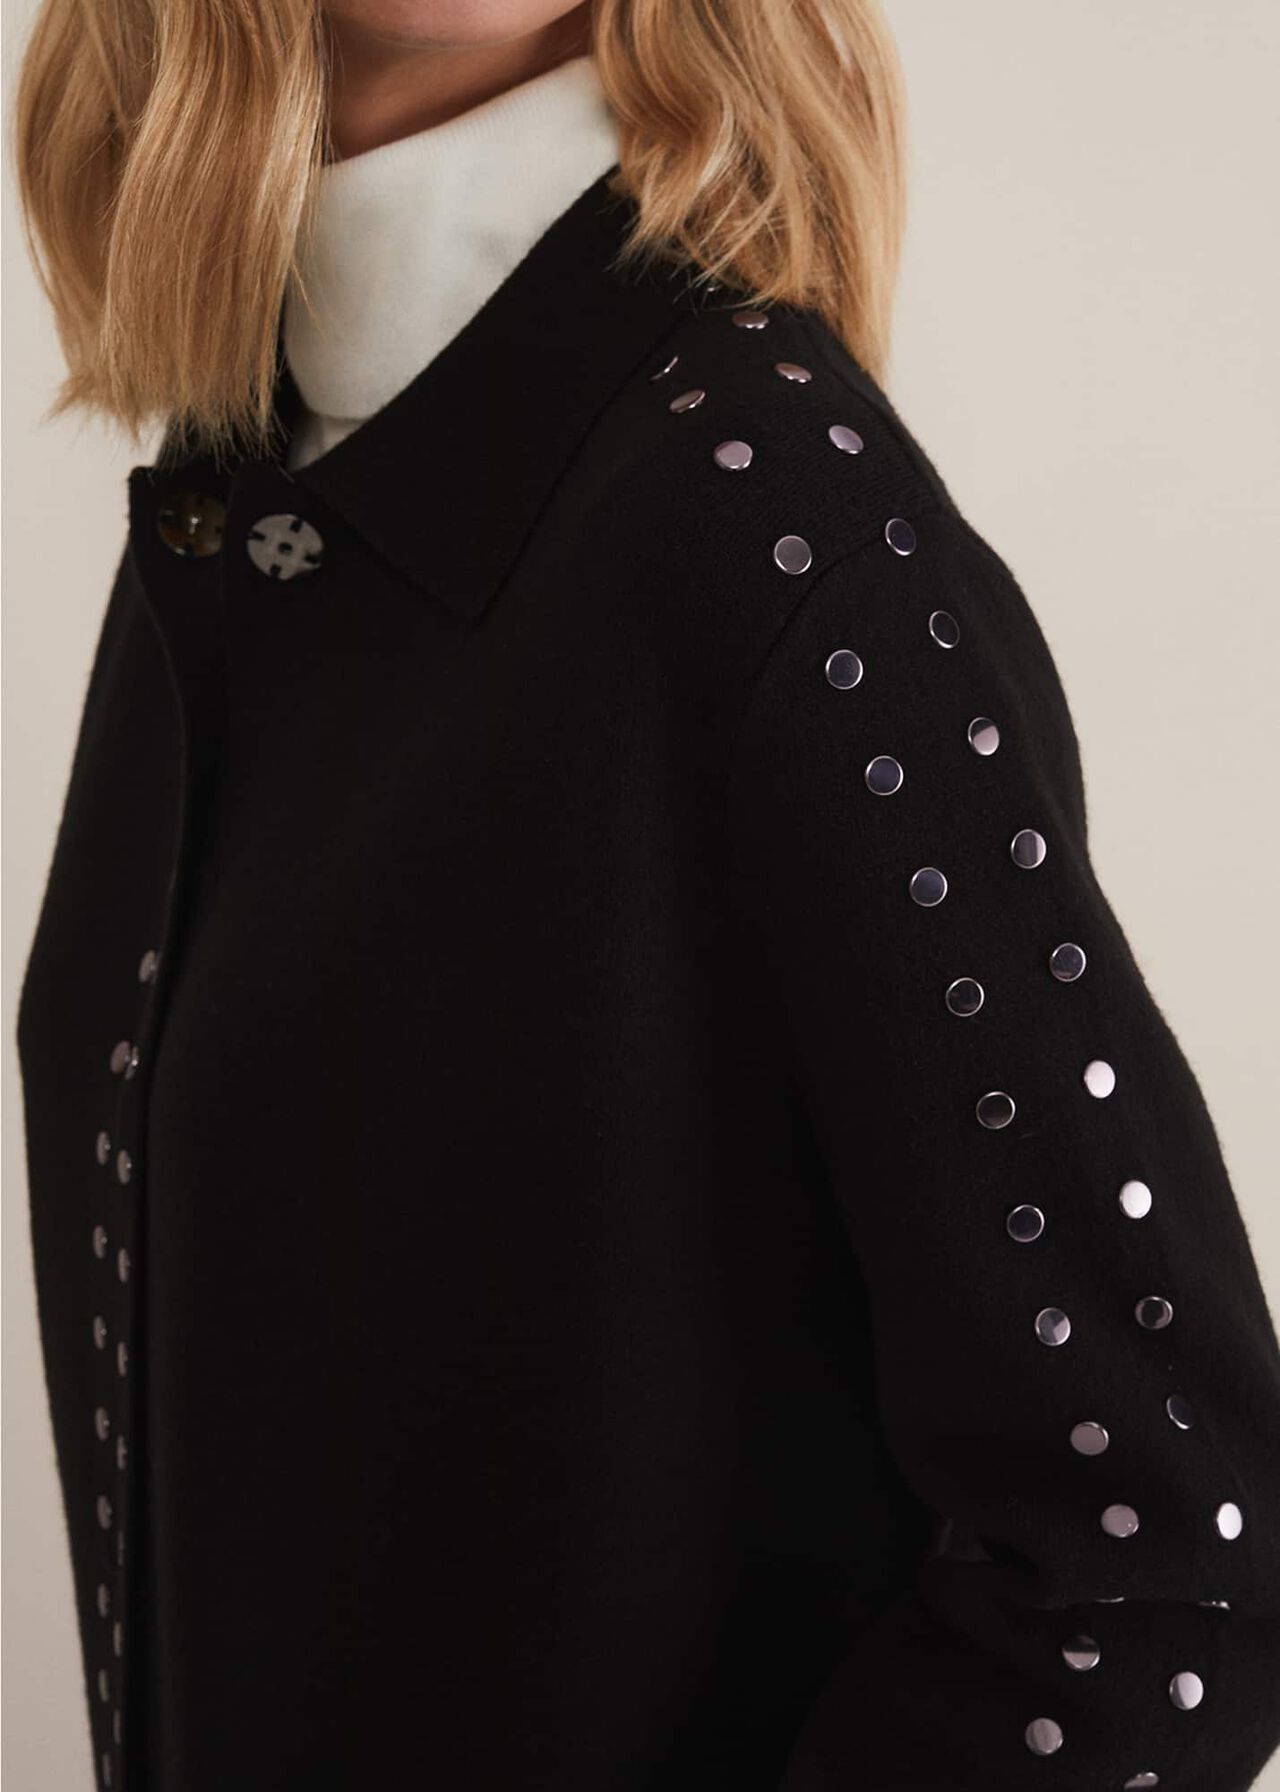 Cassidy Black Knitted Coat